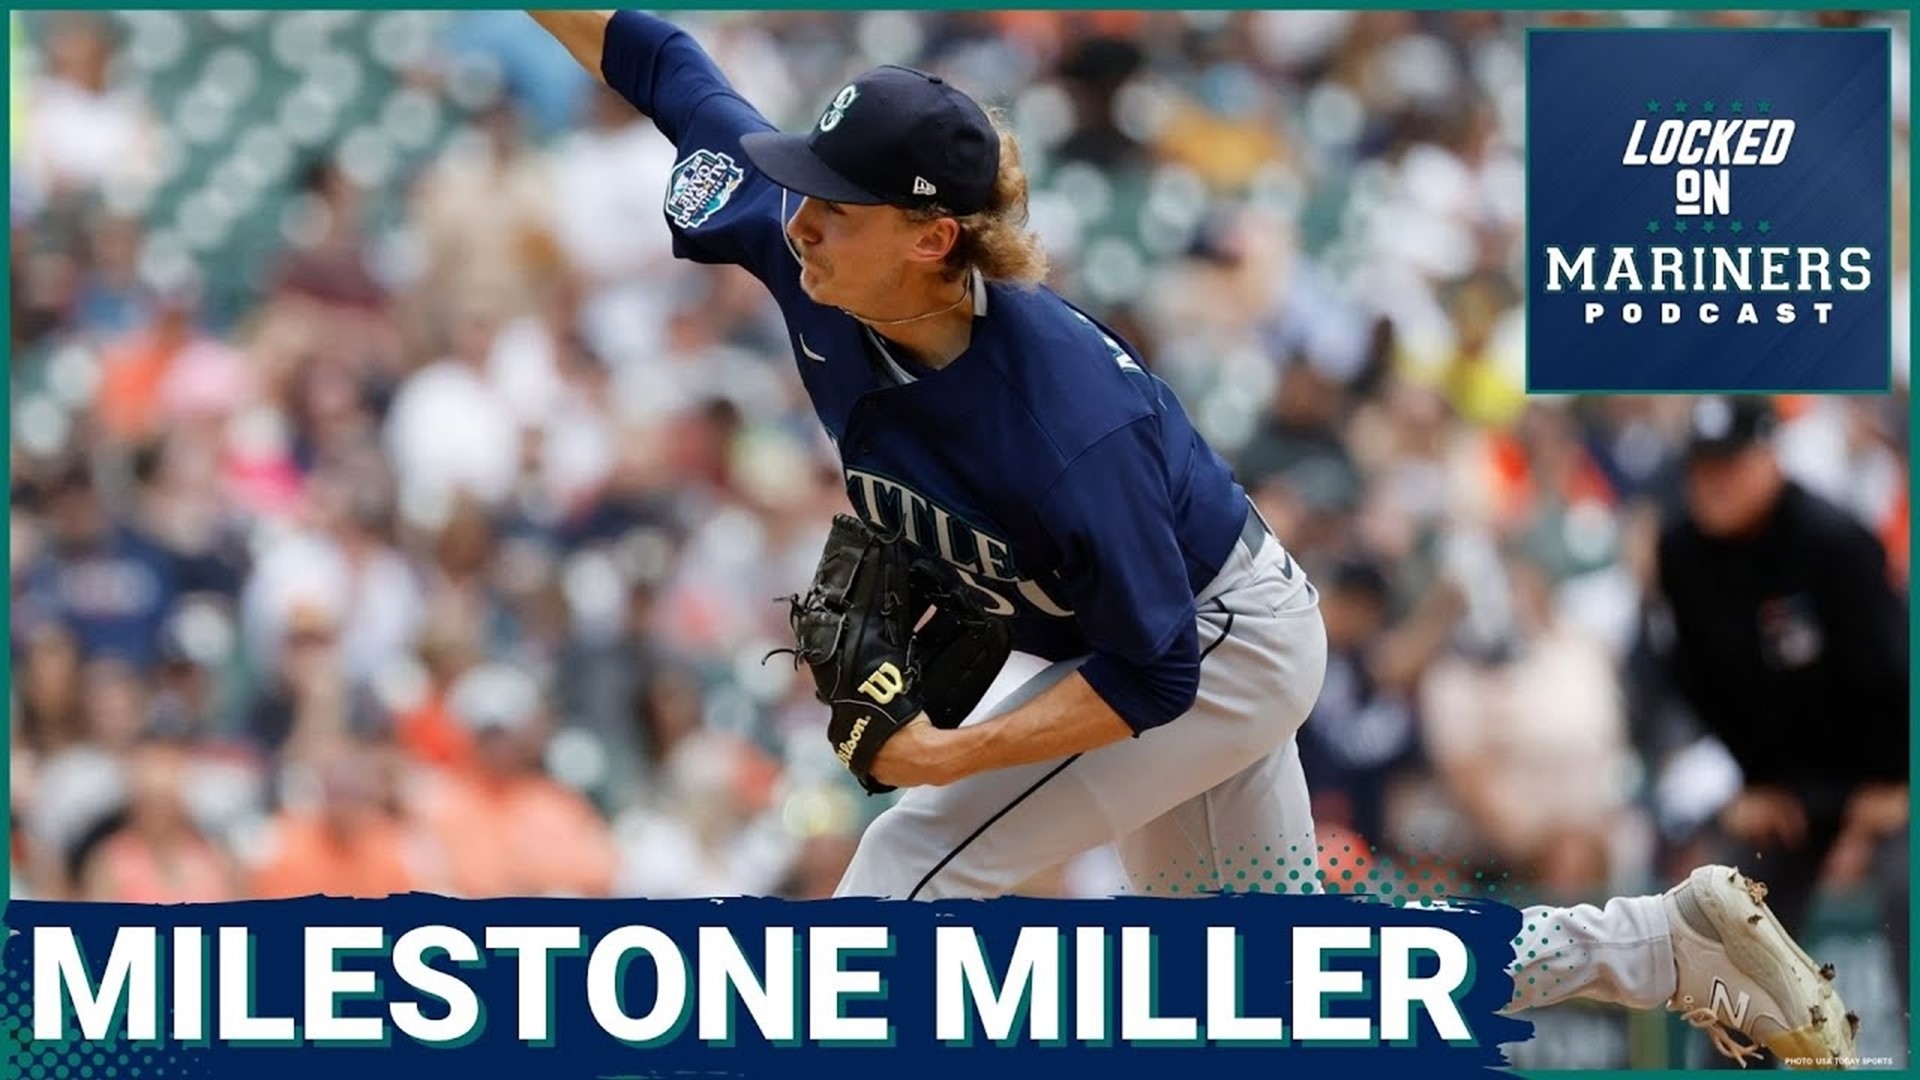 Bryce Miller was spectacular once again in the Mariners' 5-0 win over the Tigers, joining Félix Hernández as the second Mariners pitch to post a sub-1.00 ERA.